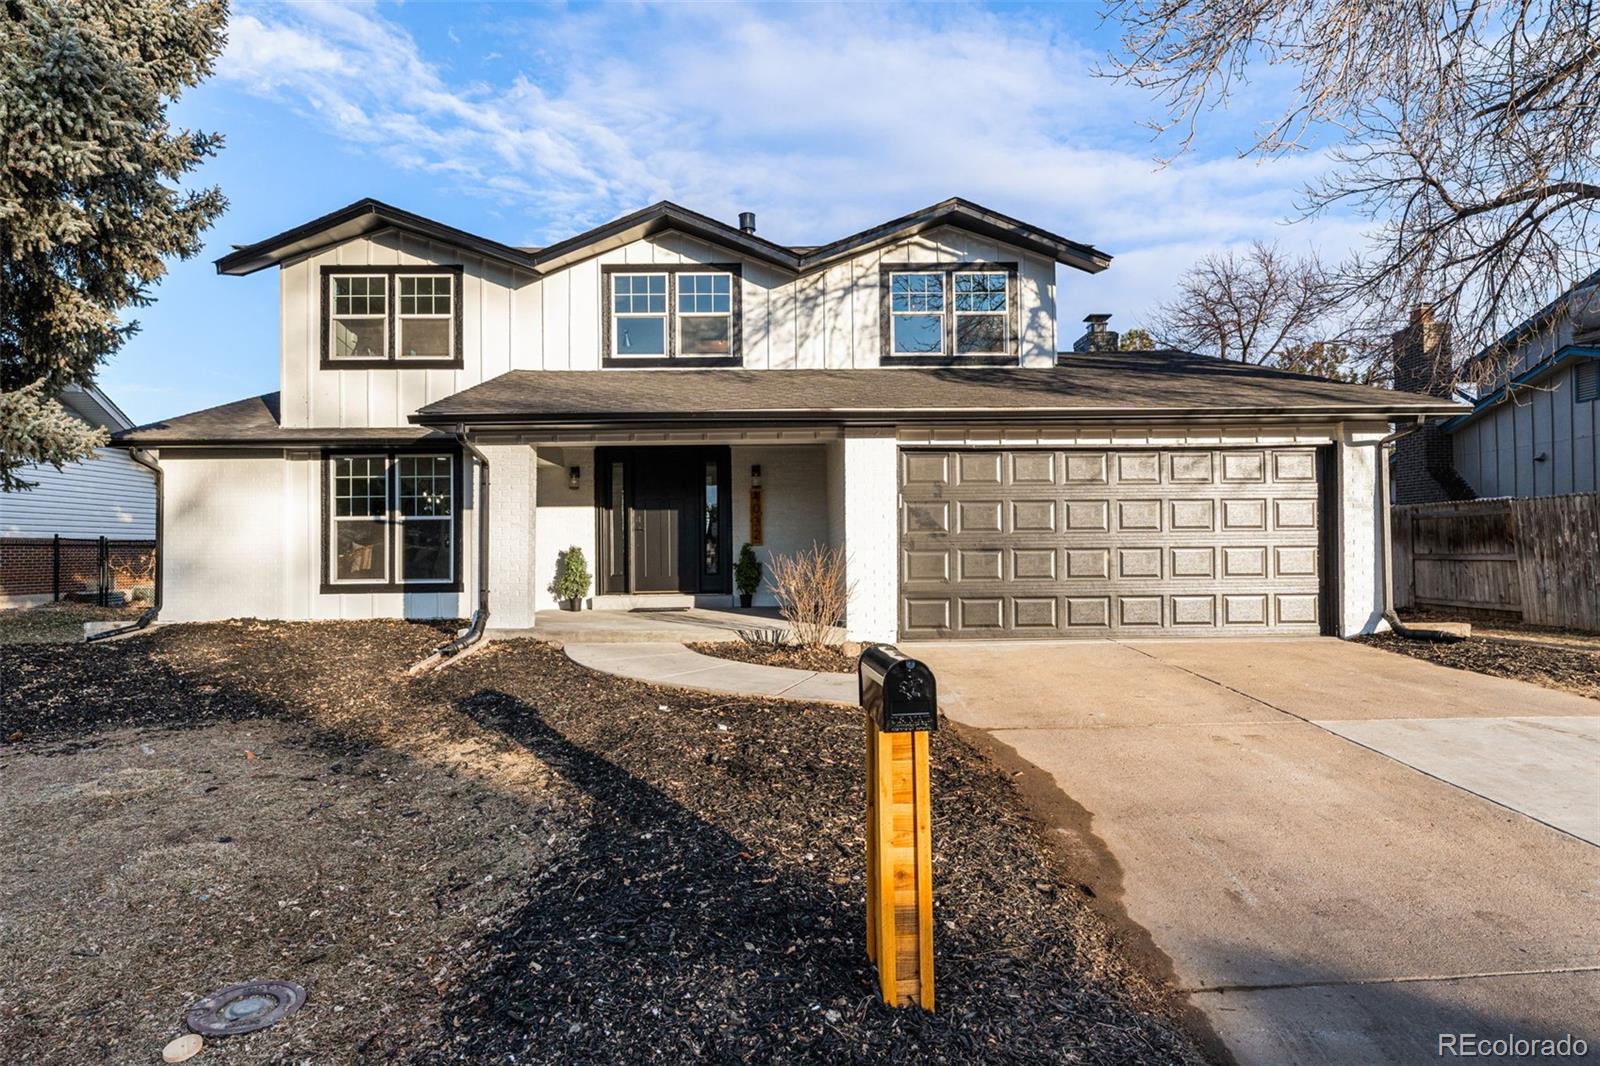 4032 s willow way, denver sold home. Closed on 2024-05-03 for $760,000.